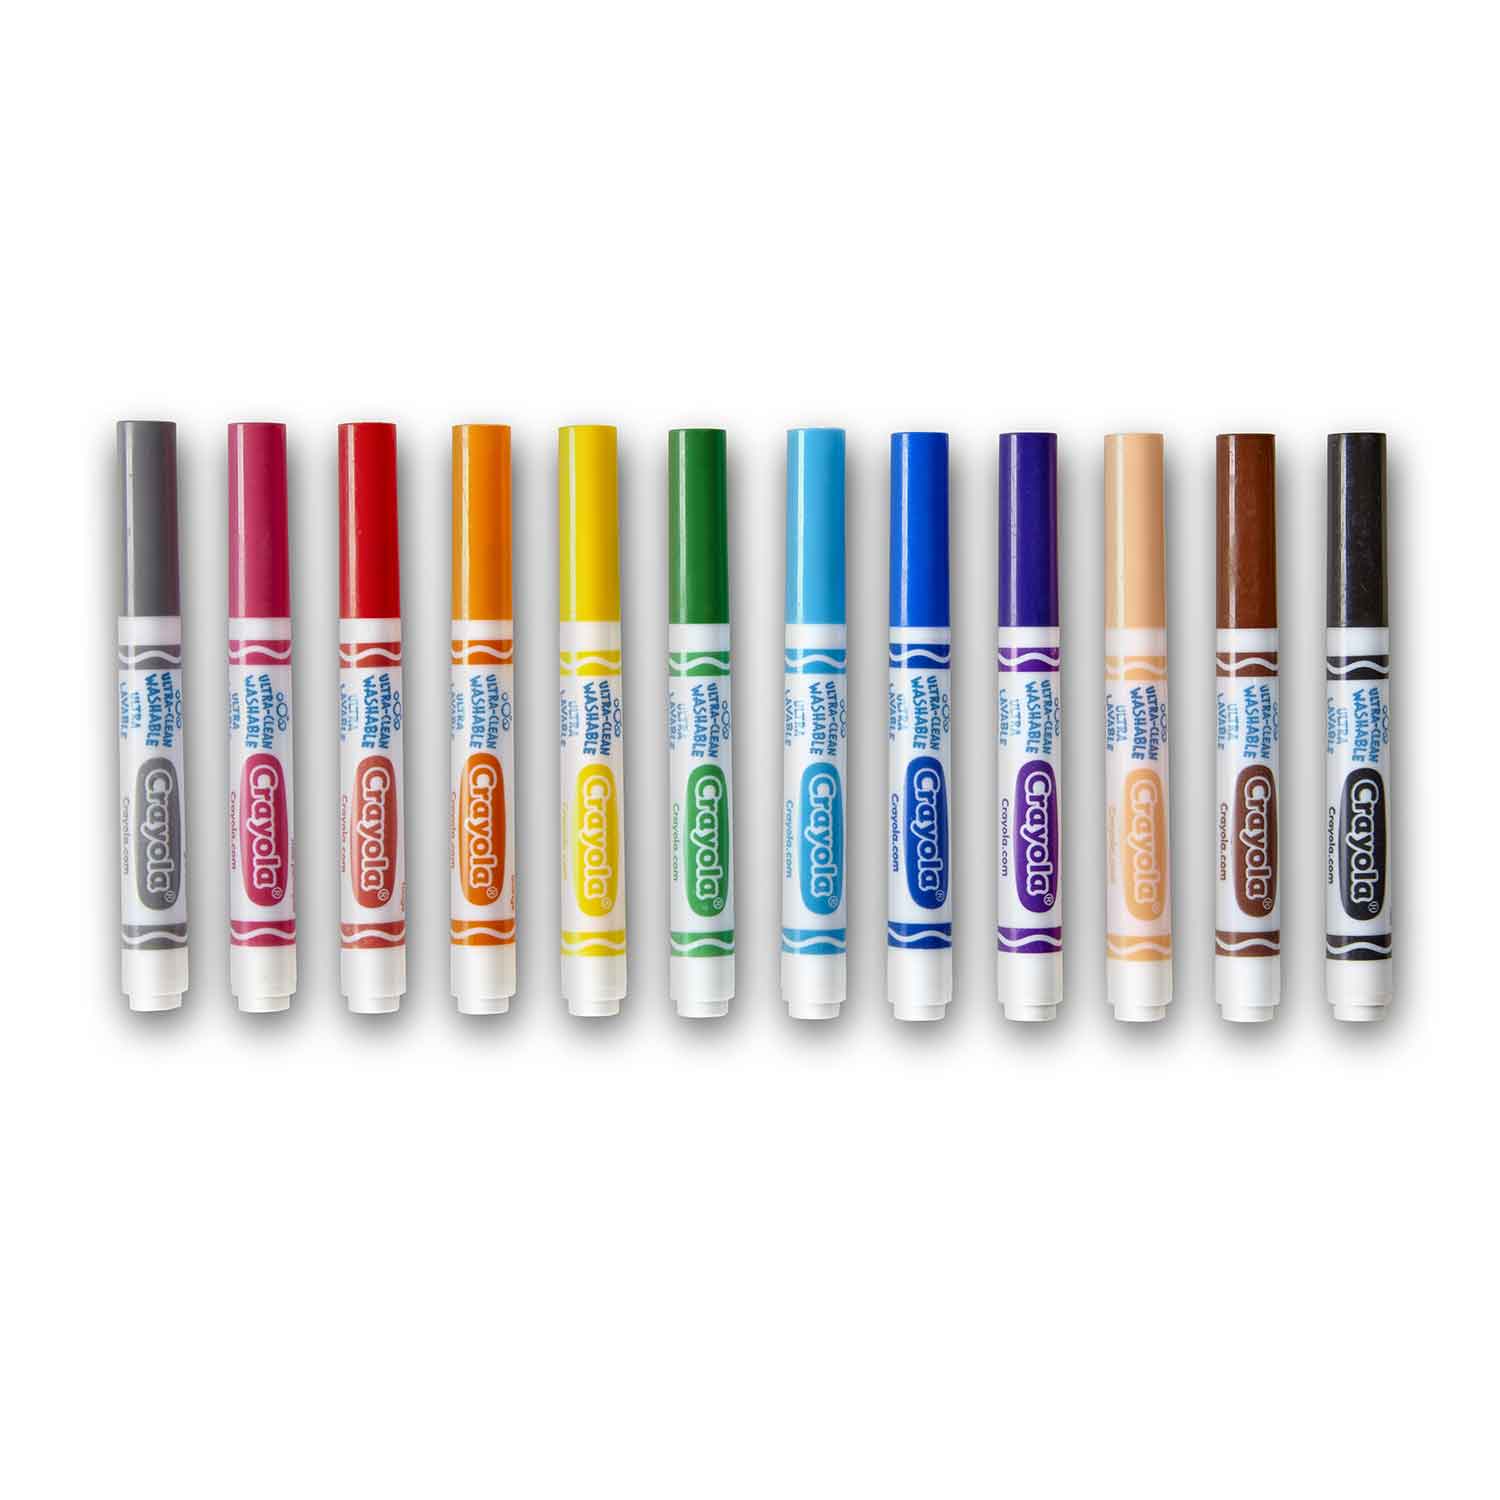 12 PACK LOT 2 IN 1 DOUBLE SIDED MARKERS WASHABLE 12 COLORS BROAD LINE